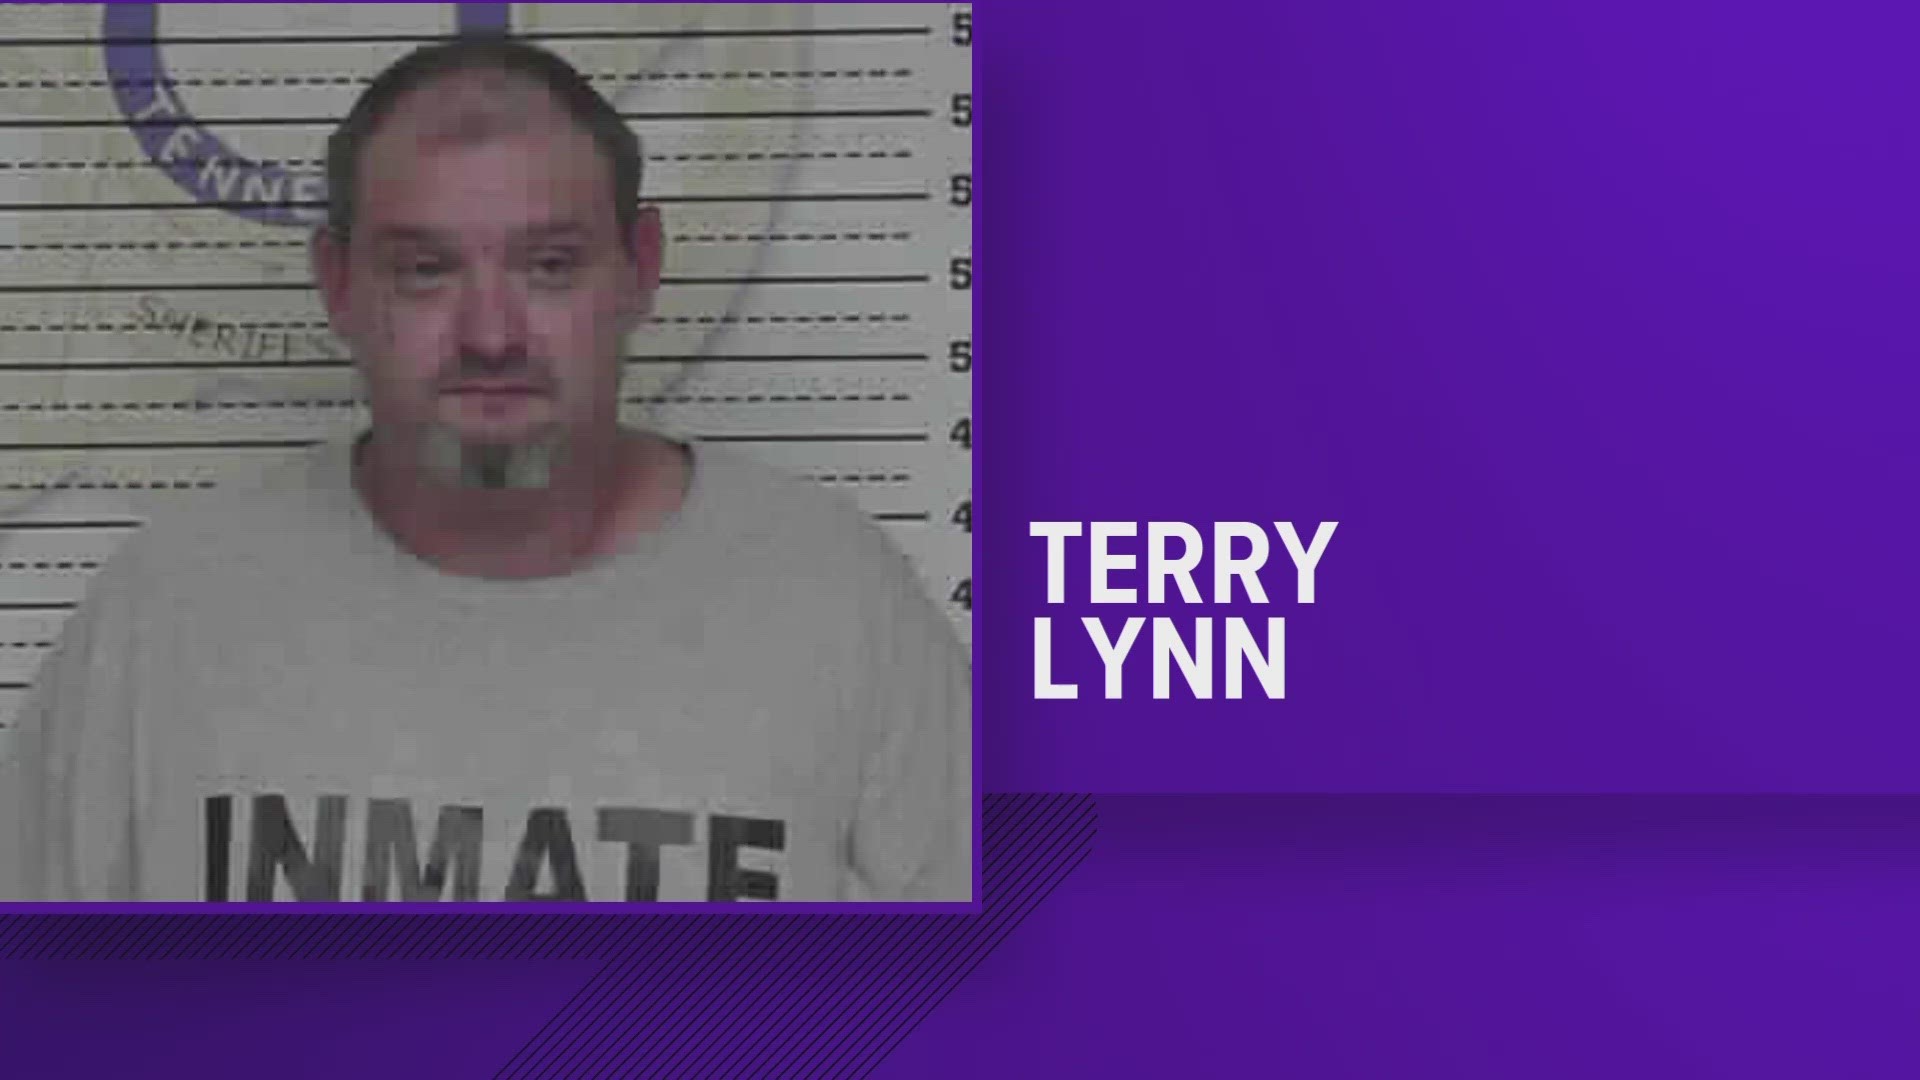 A deputy did fire his gun at 42-year-old Terry Lynn as he was evading arrest, according to the McMinn County Sheriff's Office.